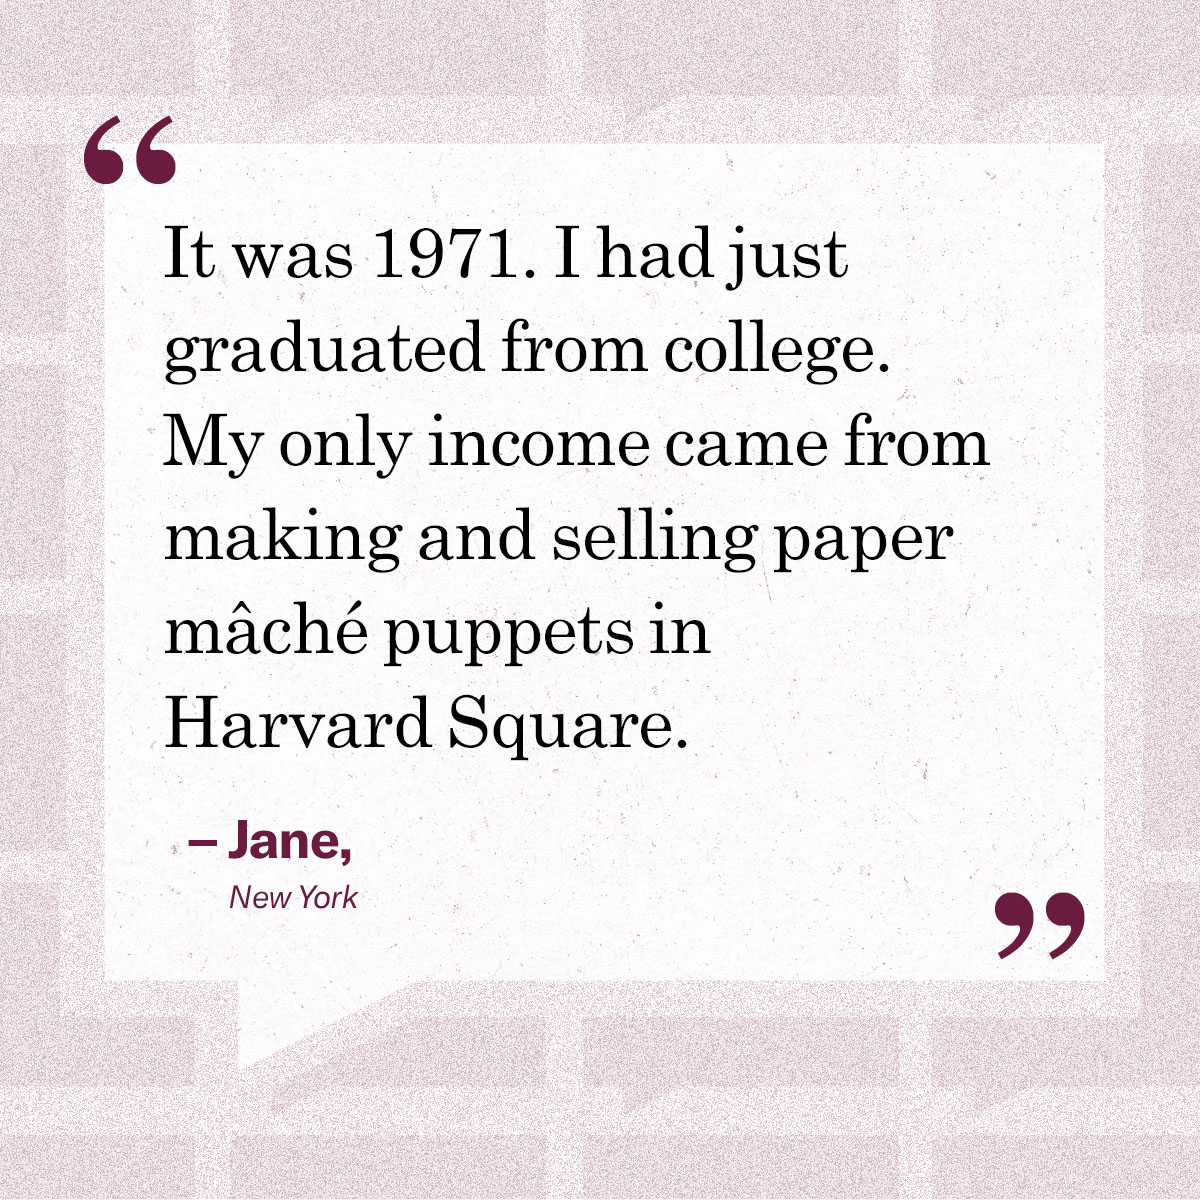 “It was 1971. I had just graduated from college. My only income came from making and selling paper mâché puppets in Harvard Square.” – Jane, New York